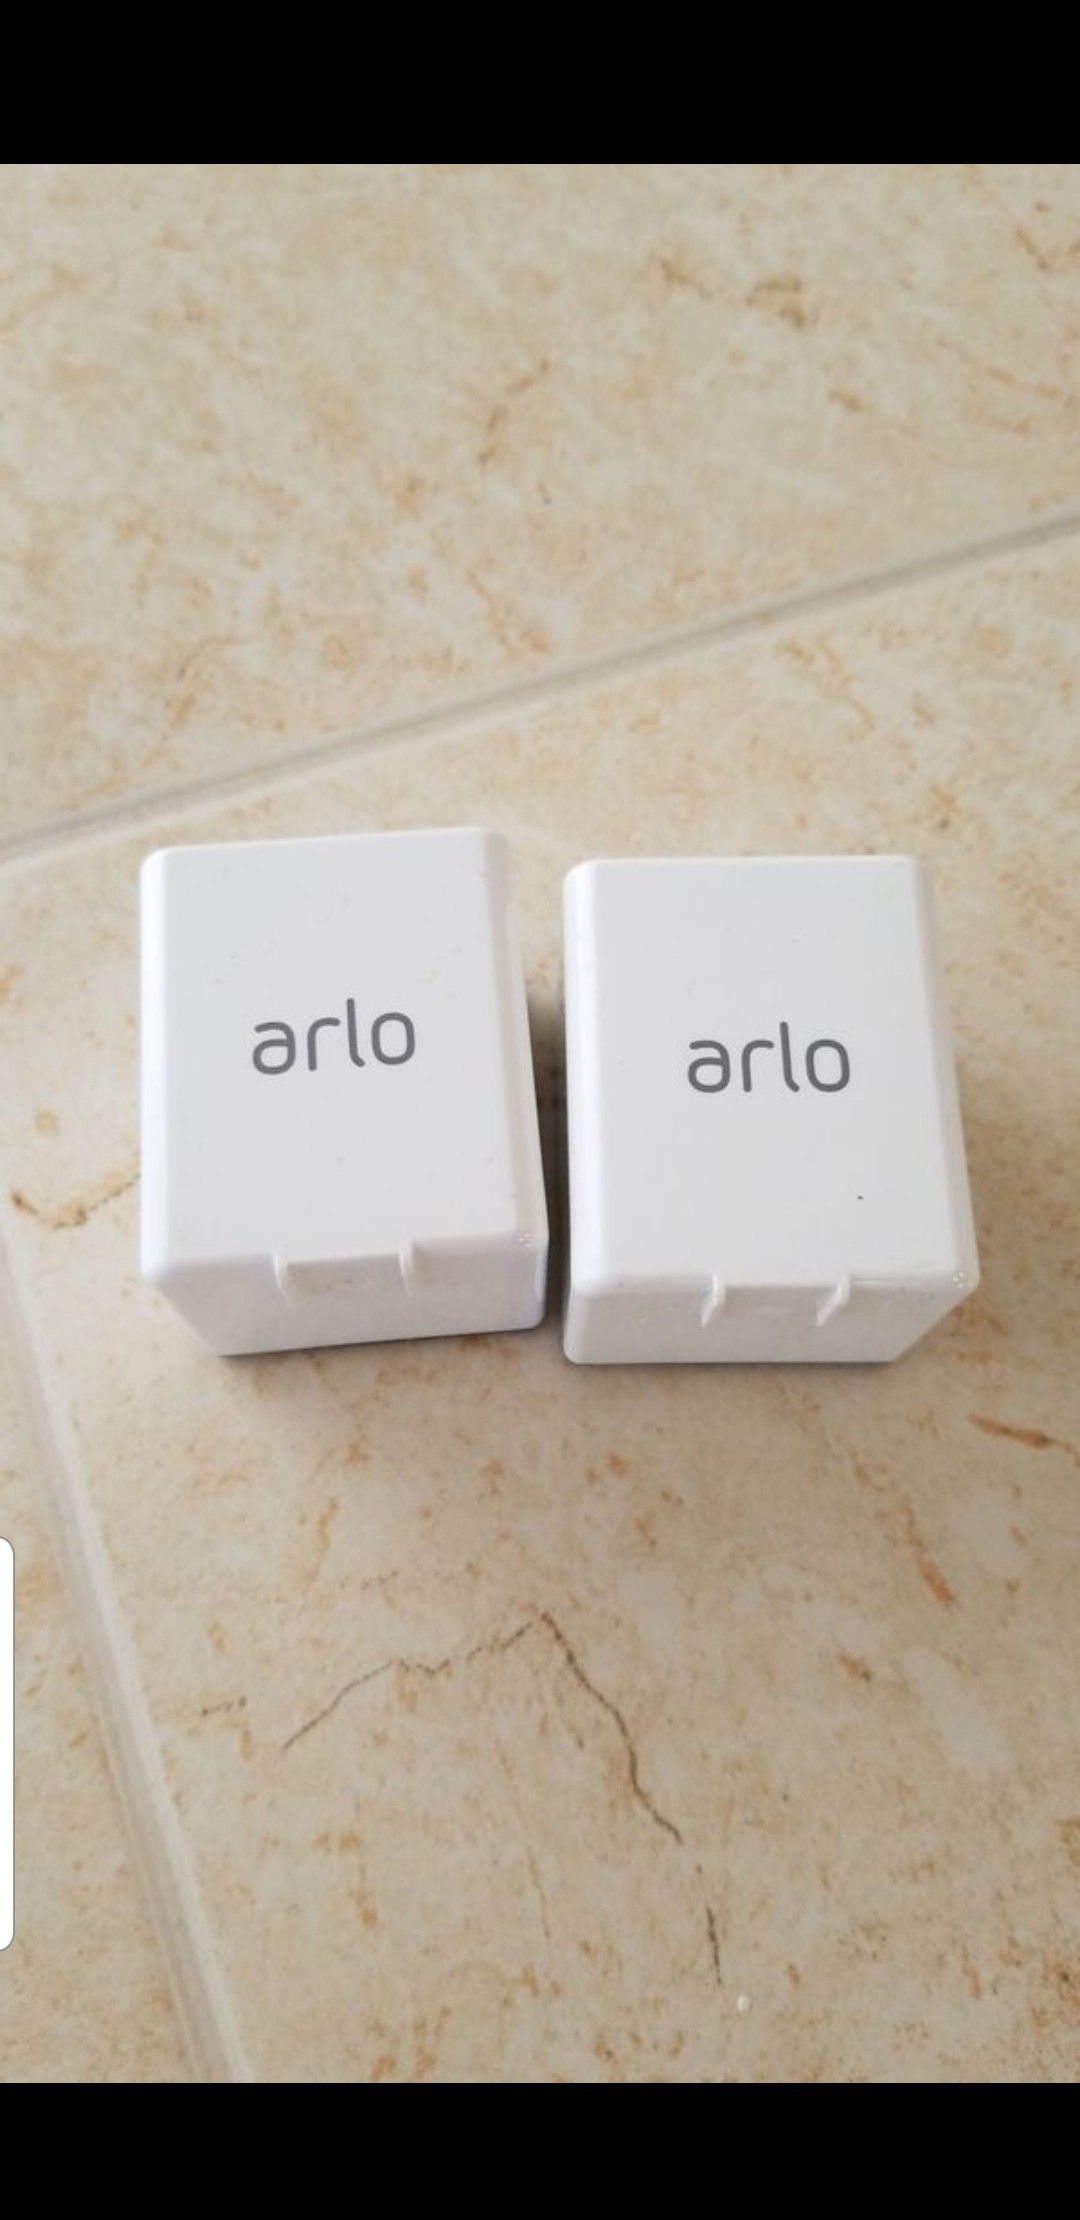 4 x arlo and arlo 2 security camera battery used-excellent